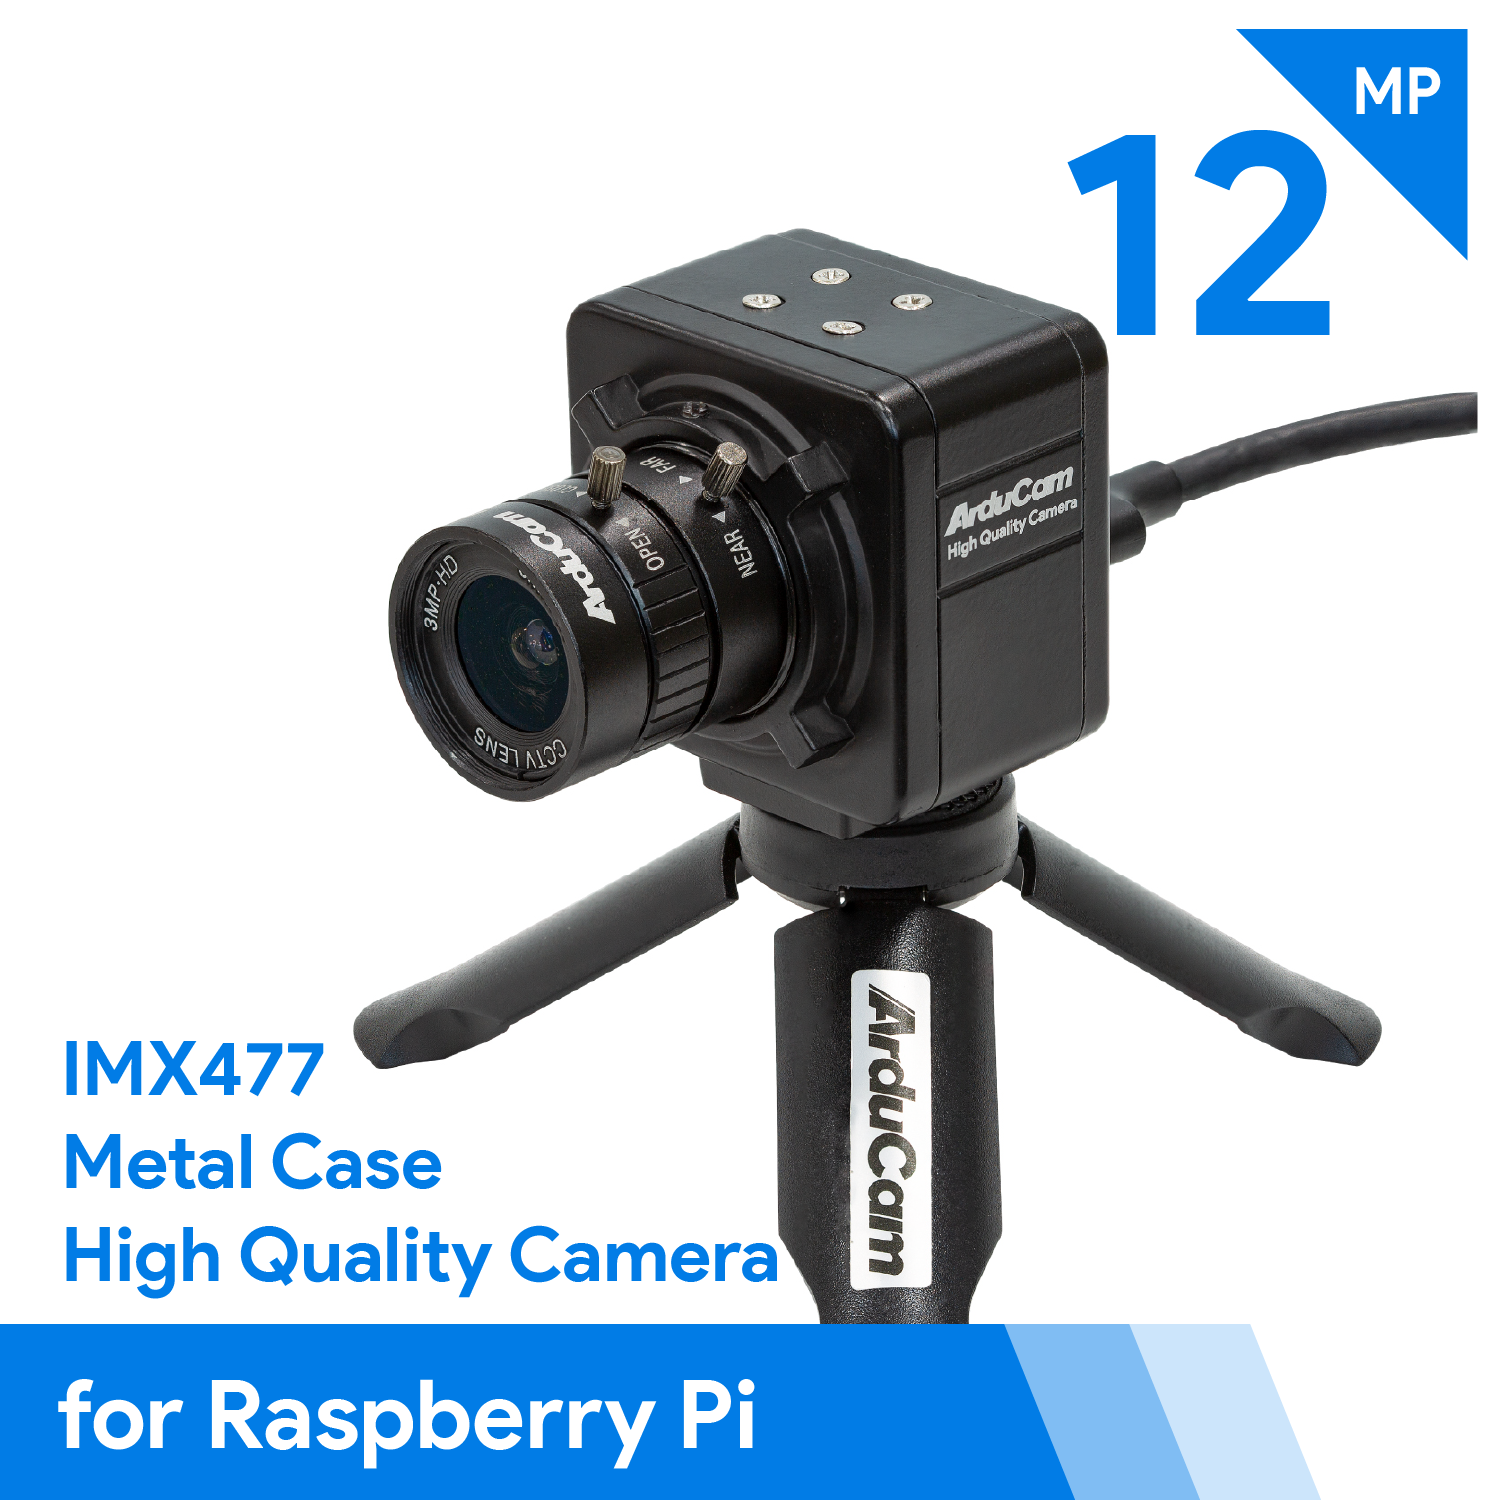 Arducam Complete High Quality Camera Bundle for Raspberry Pi, 12.3MP 1/2.3 Inch IMX477 Camera Module with 6mm CS-Mount Lens, Metal Enclosure, Tripod and HDMI Extension Adapter